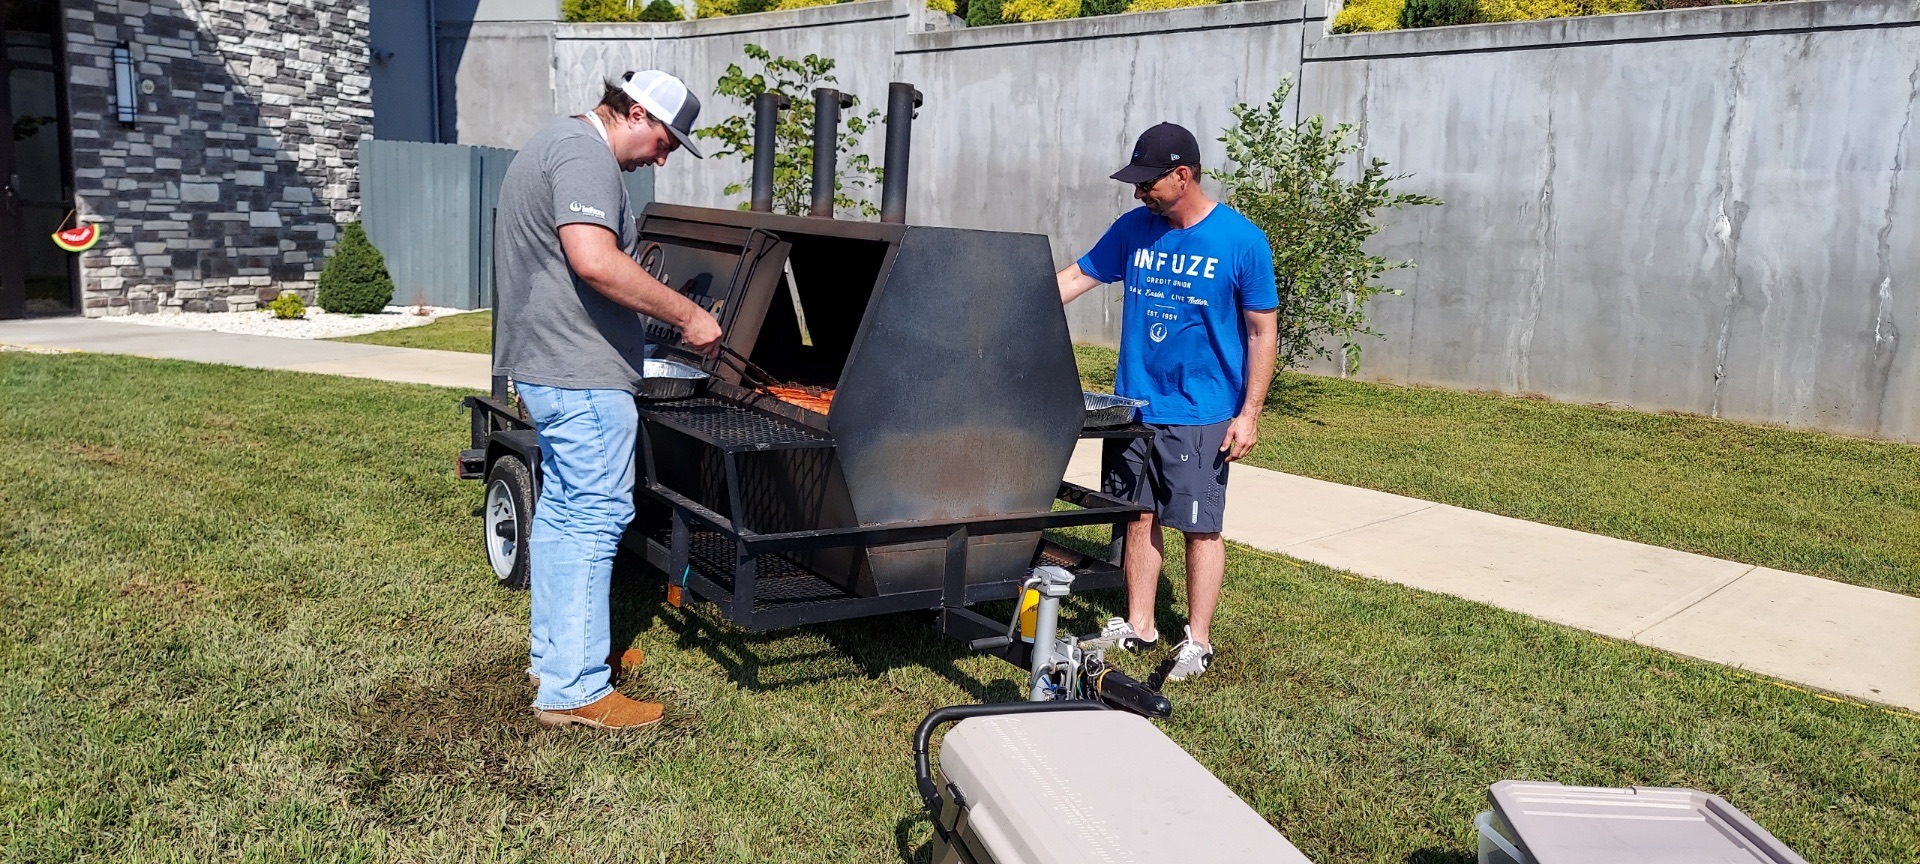 Two men grilling.